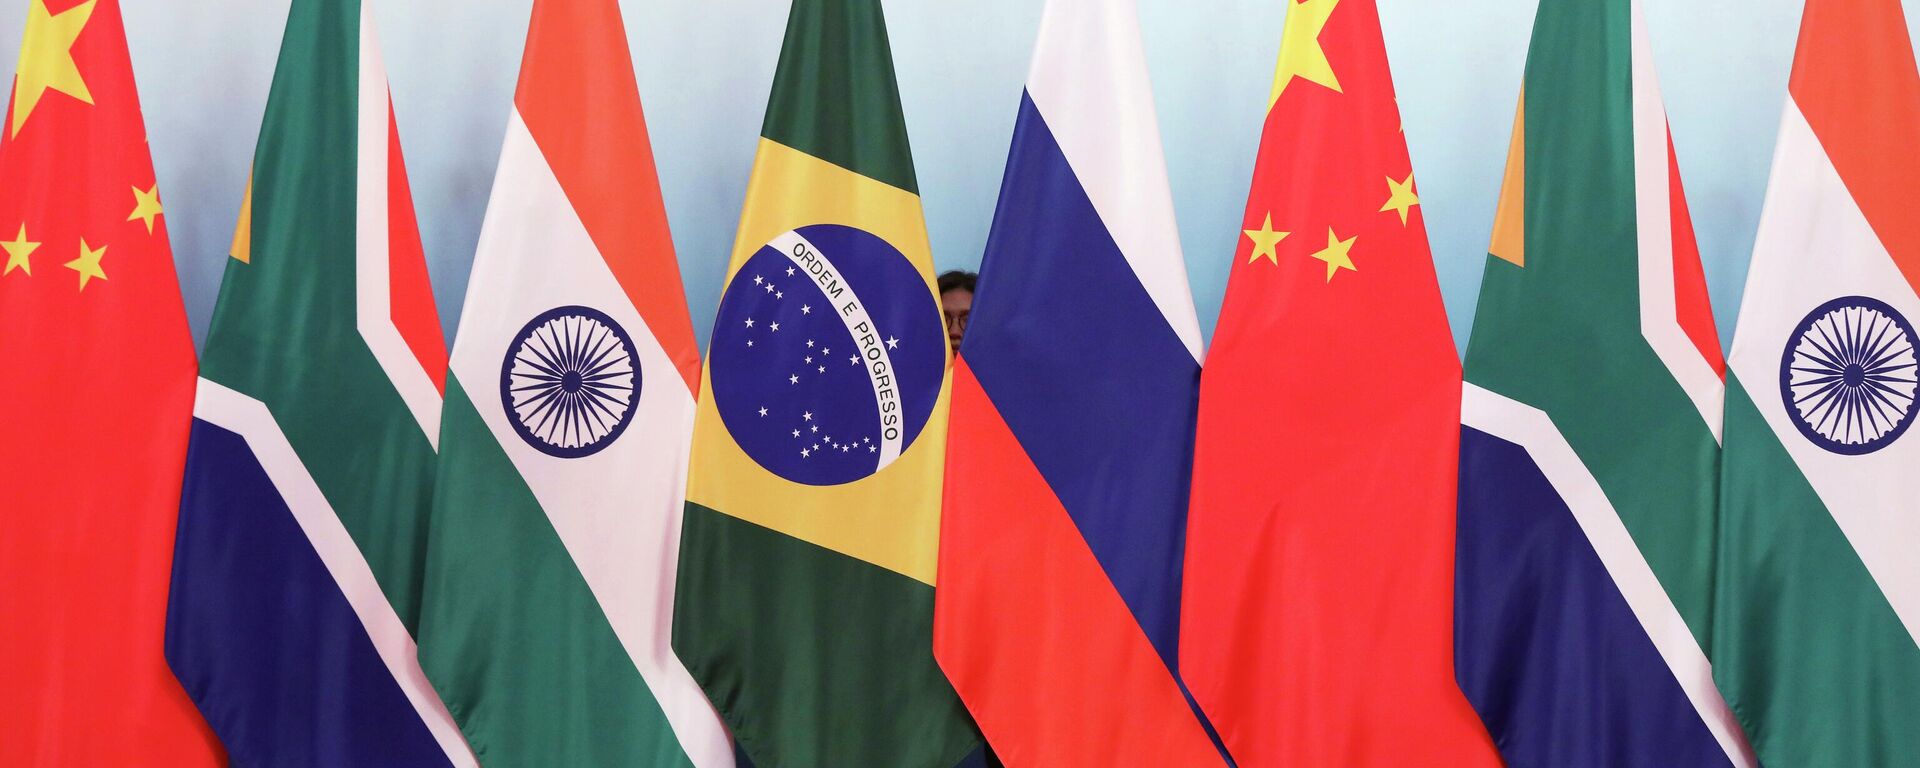 Staff worker stands behind national flags of Brazil, Russia, China, South Africa and India to tidy the flags ahead of a group photo during the BRICS Summit at the Xiamen International Conference and Exhibition Center in Xiamen, southeastern China's Fujian Province, Monday, Sept. 4, 2017. - Sputnik International, 1920, 24.05.2023